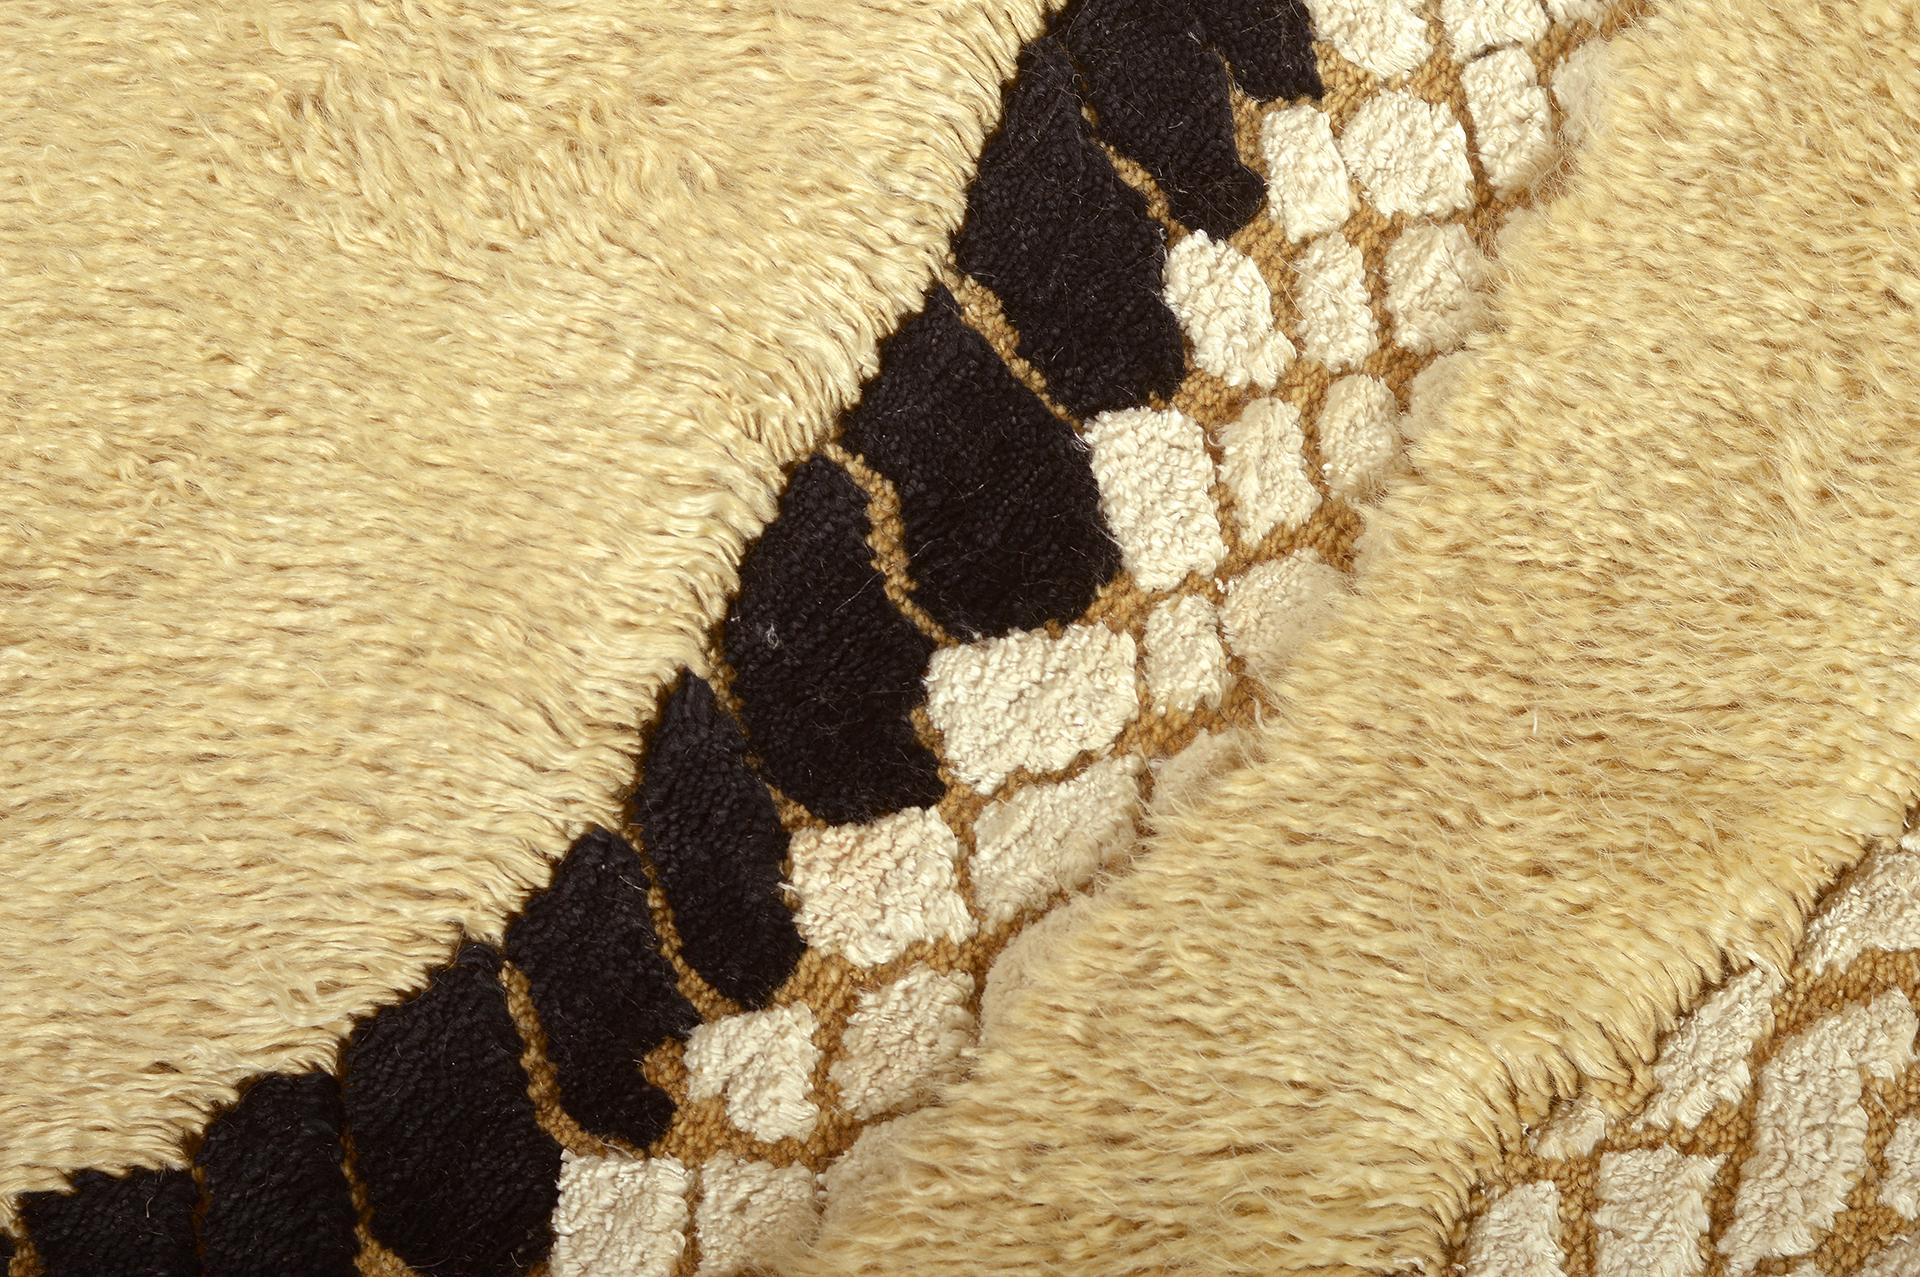 This rug holds personal importance for liesel, paying homage to her mother’s origin in Thailand and the mythology and imagery of a place brought to life in stories. The serpent is an auspicious symbol. Liesel’s serpent is particularly charming. At